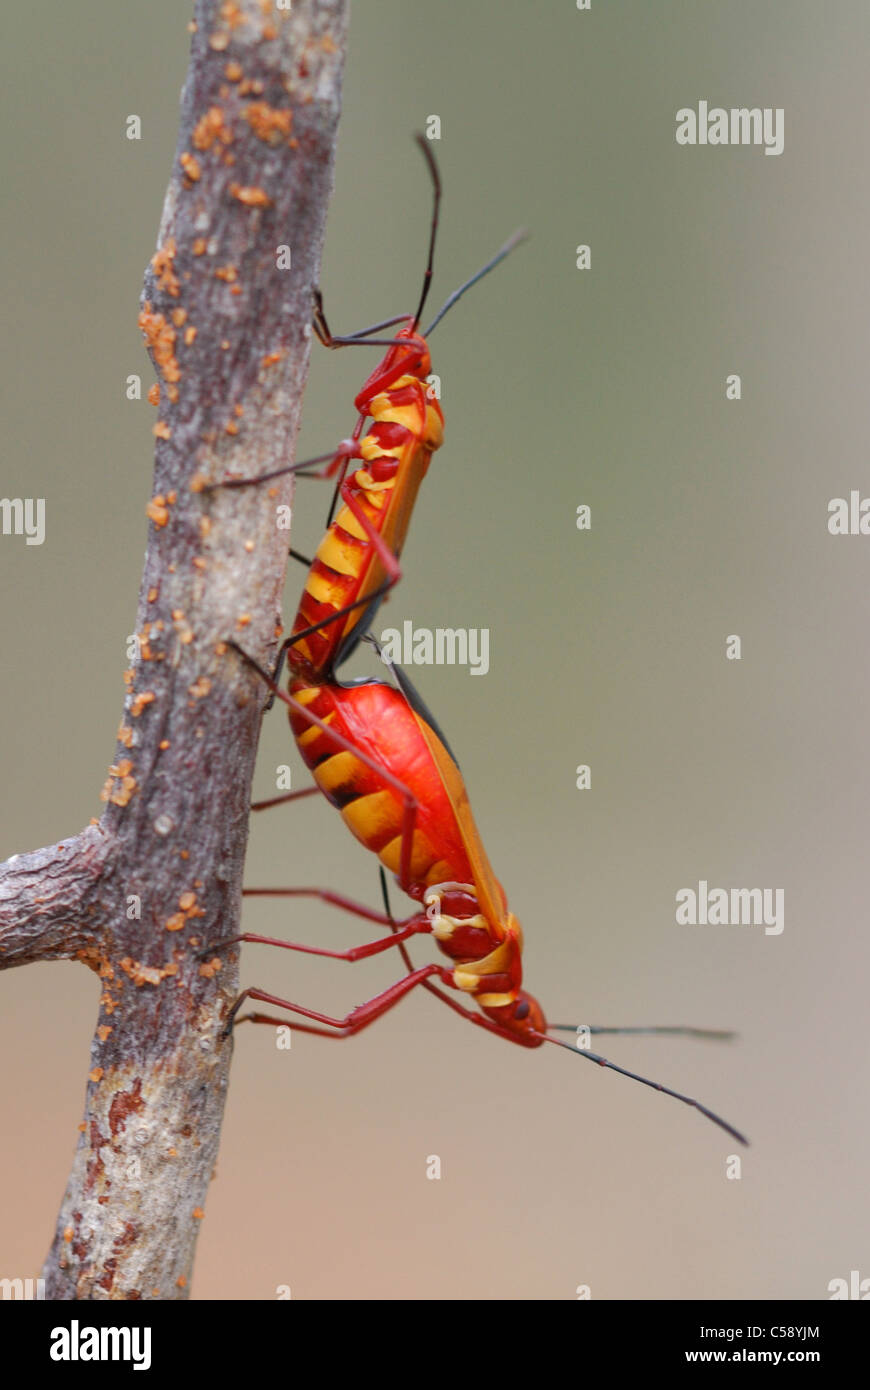 Cotton-stainer bugs (Dysdercus sp.) mating, Madagascar. Stock Photo